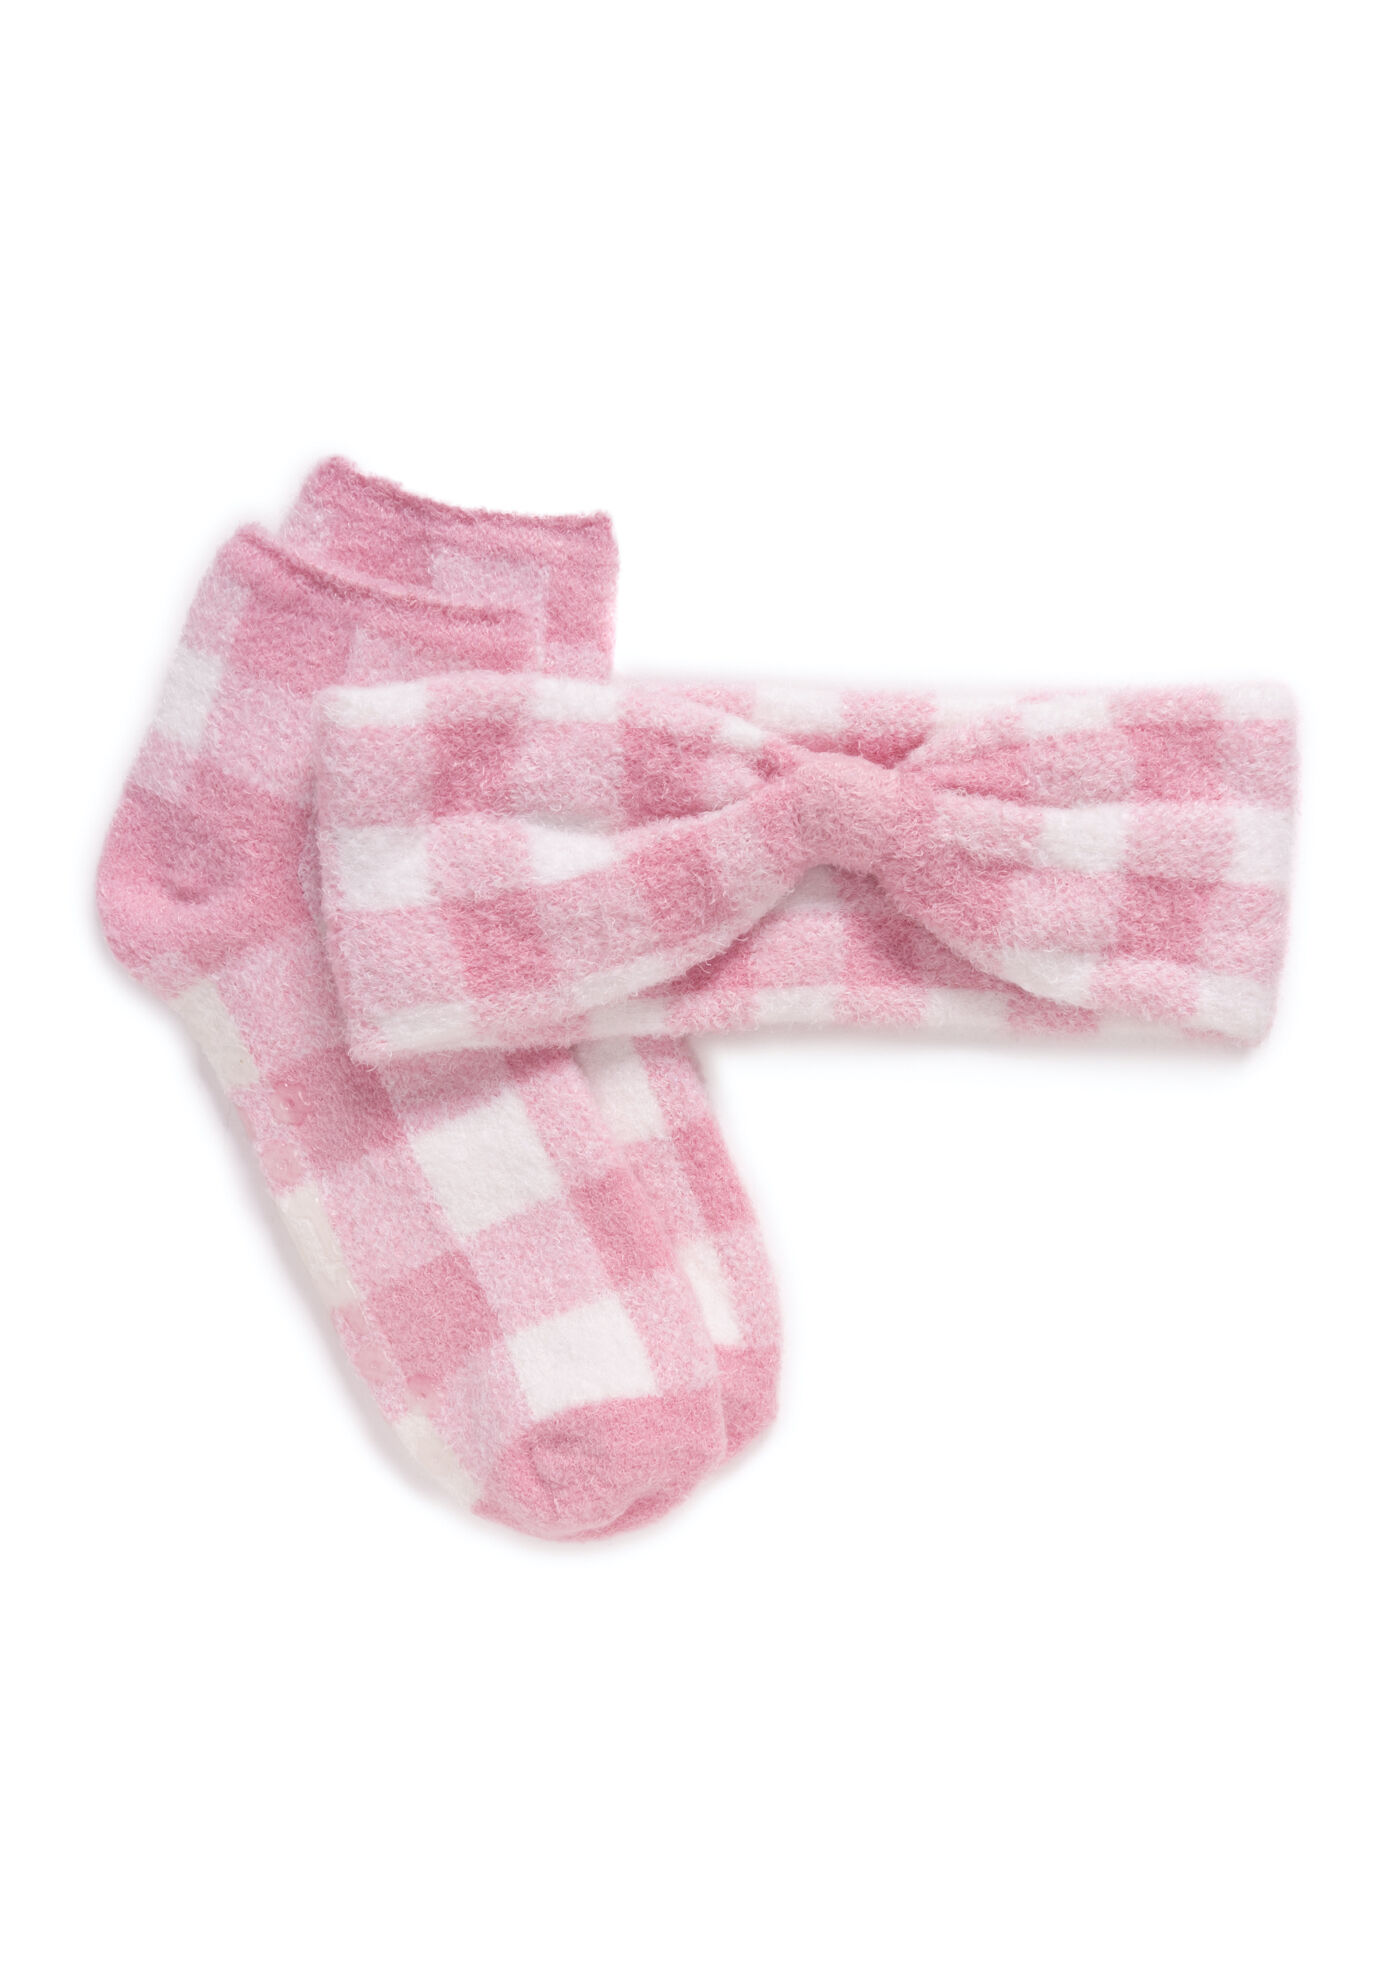 Women's Aloe Infused Sock And Headband Set by MUK LUKS in Pink (Size ONE)